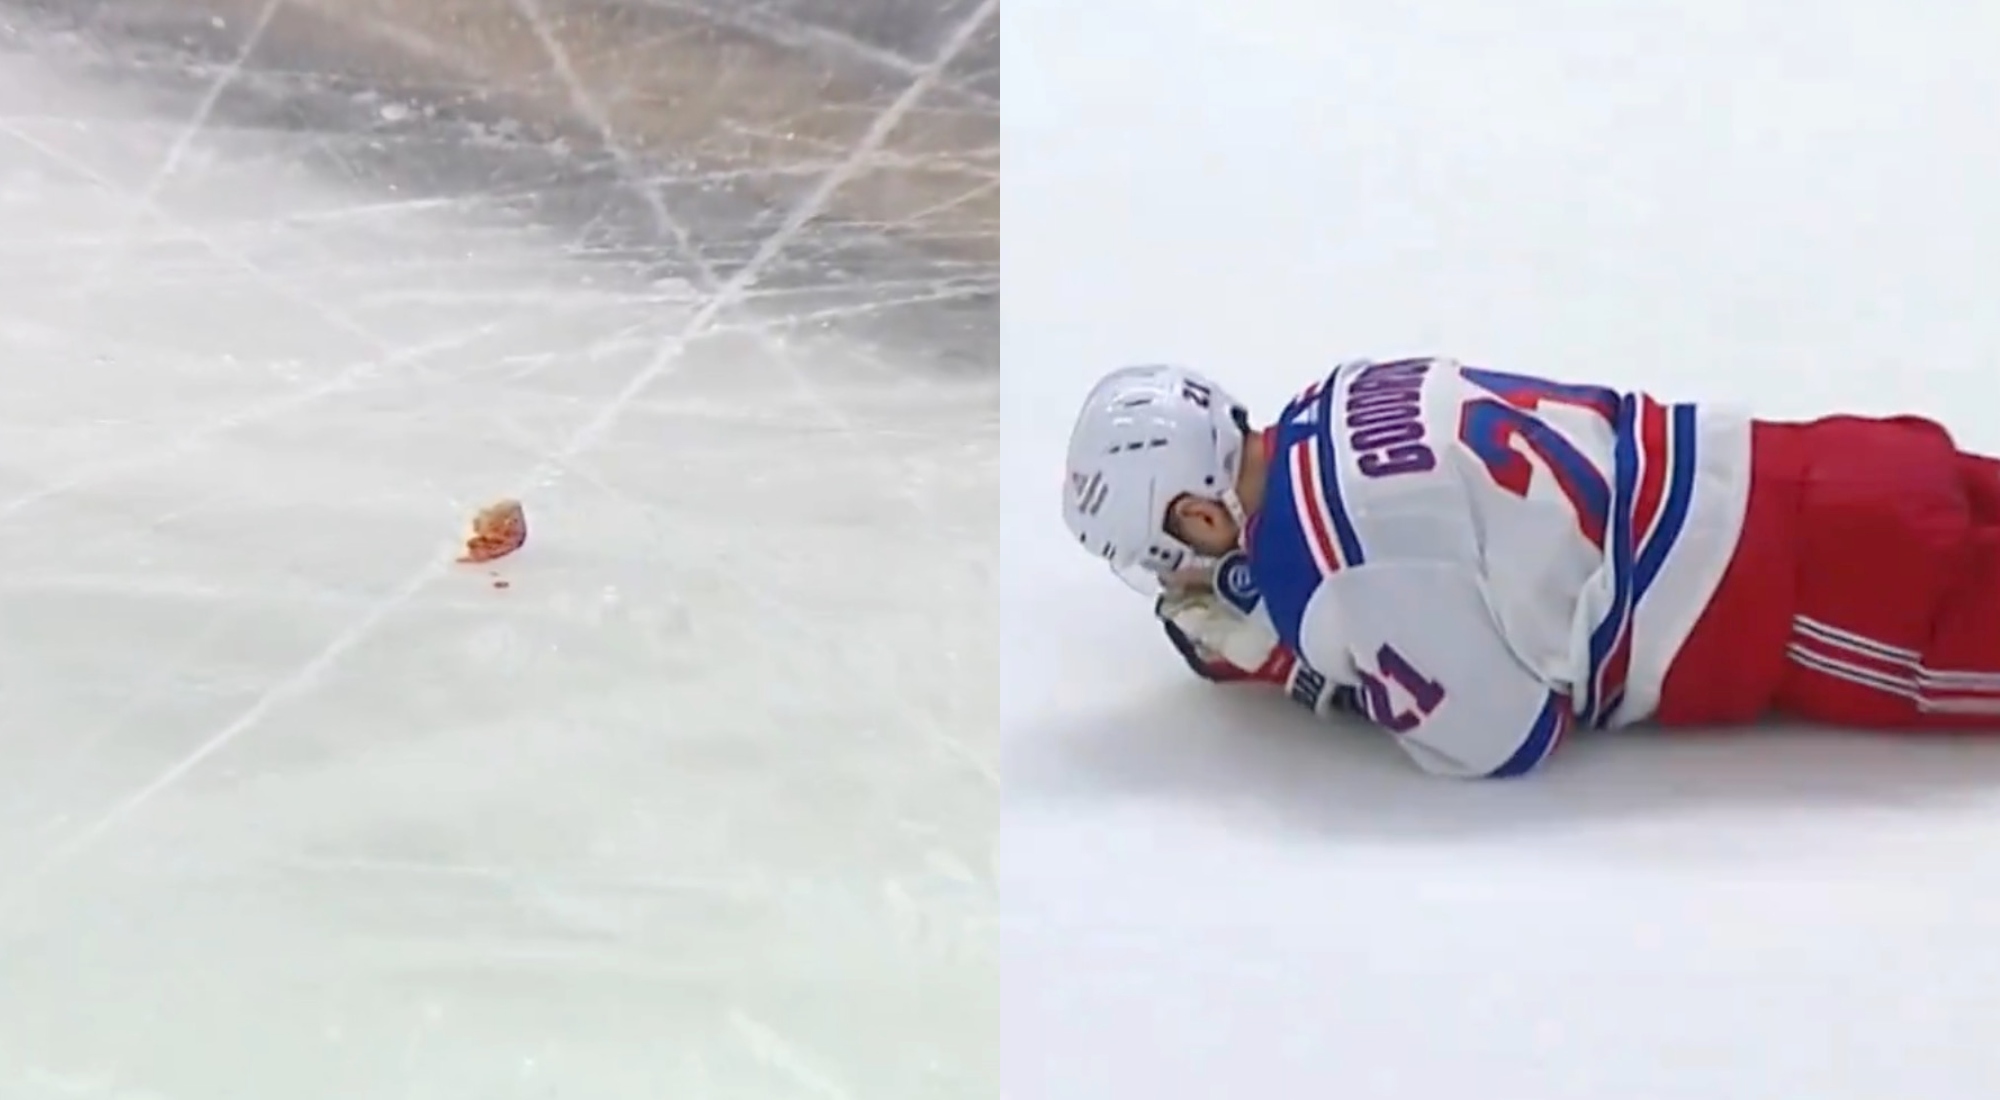 Rangers Player Spits Out Tooth After Taking Puck To Face